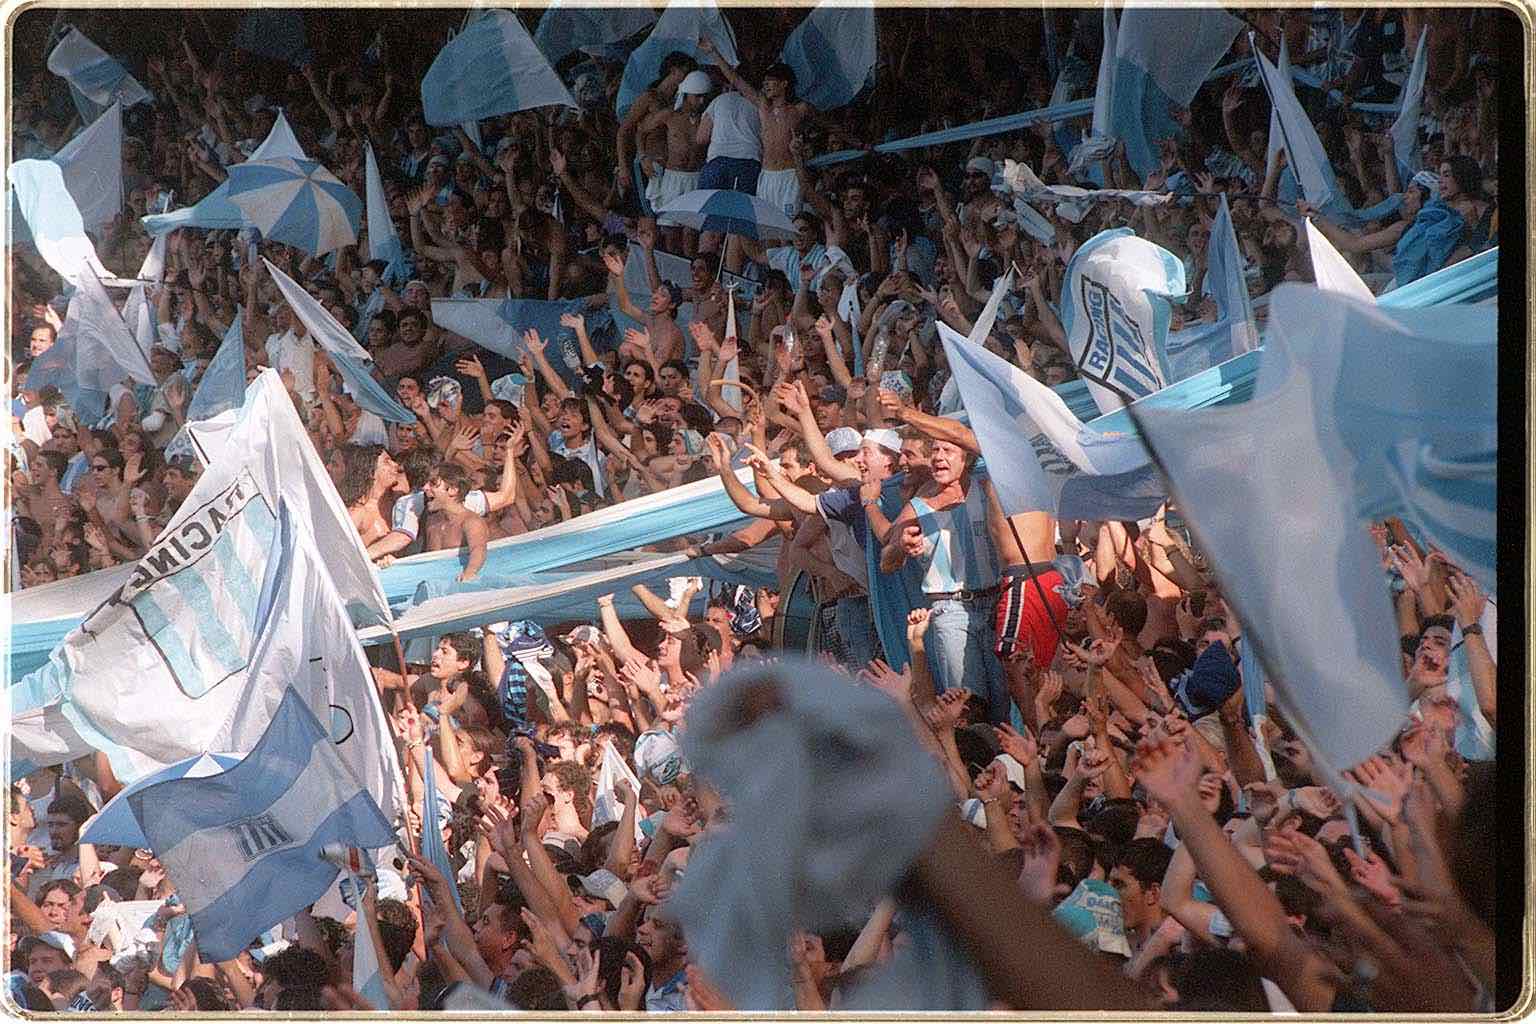 A crowd of people chant and have one or both arms raised. There are white and sky blue flags, some with the word Racing and Racing's logo, which is composed of sky blue and white vertical stripes.